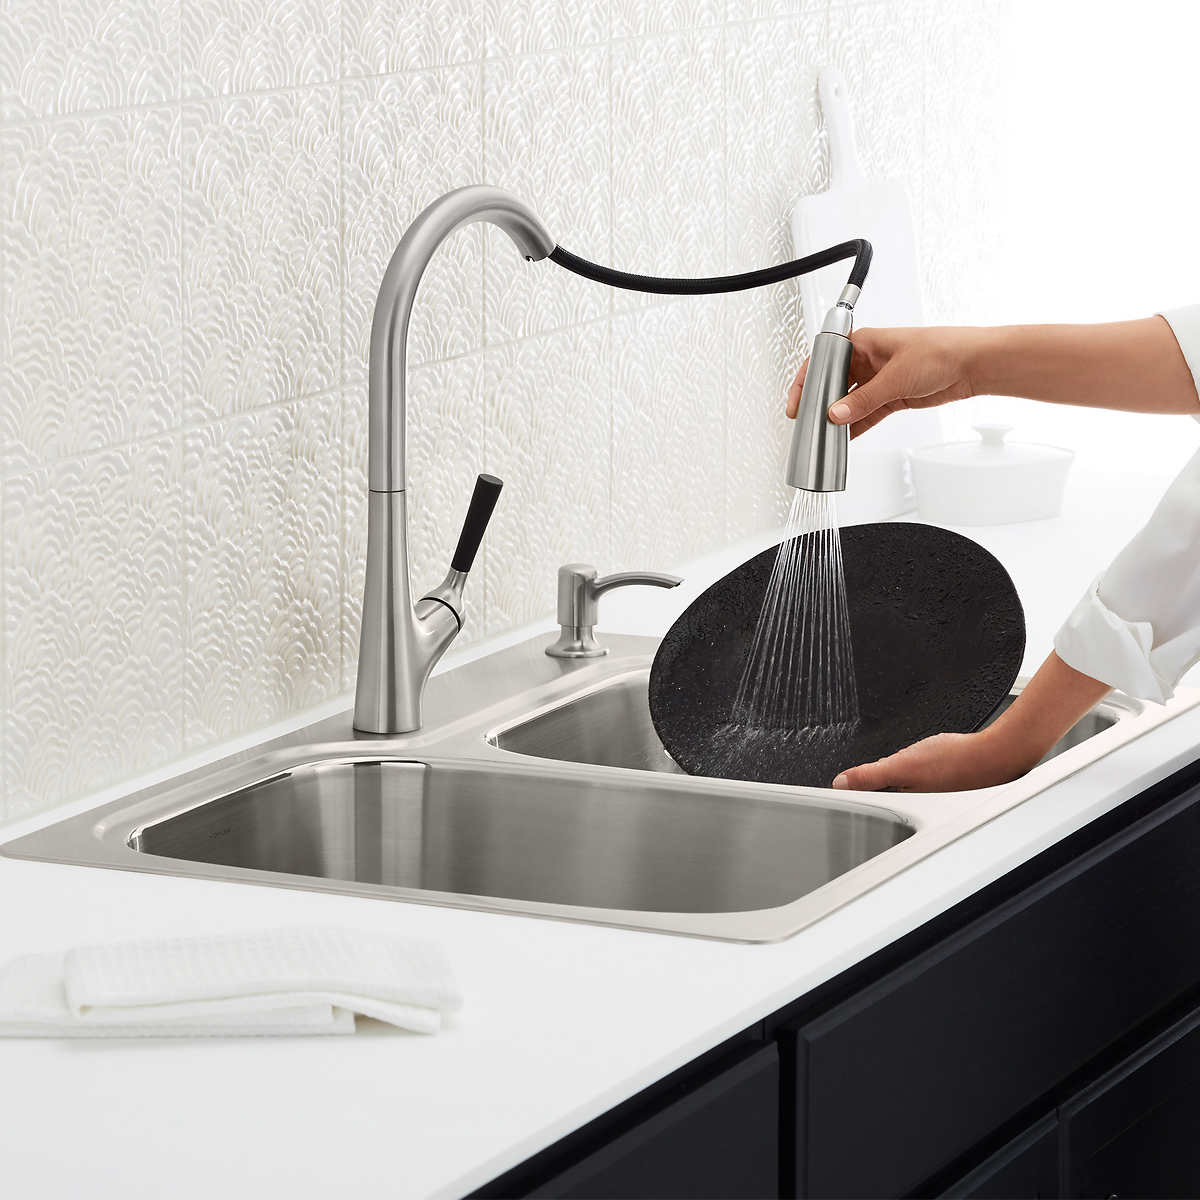 Kohler Stainless Steel Sink And Malleco Pull Down Kitchen Faucet